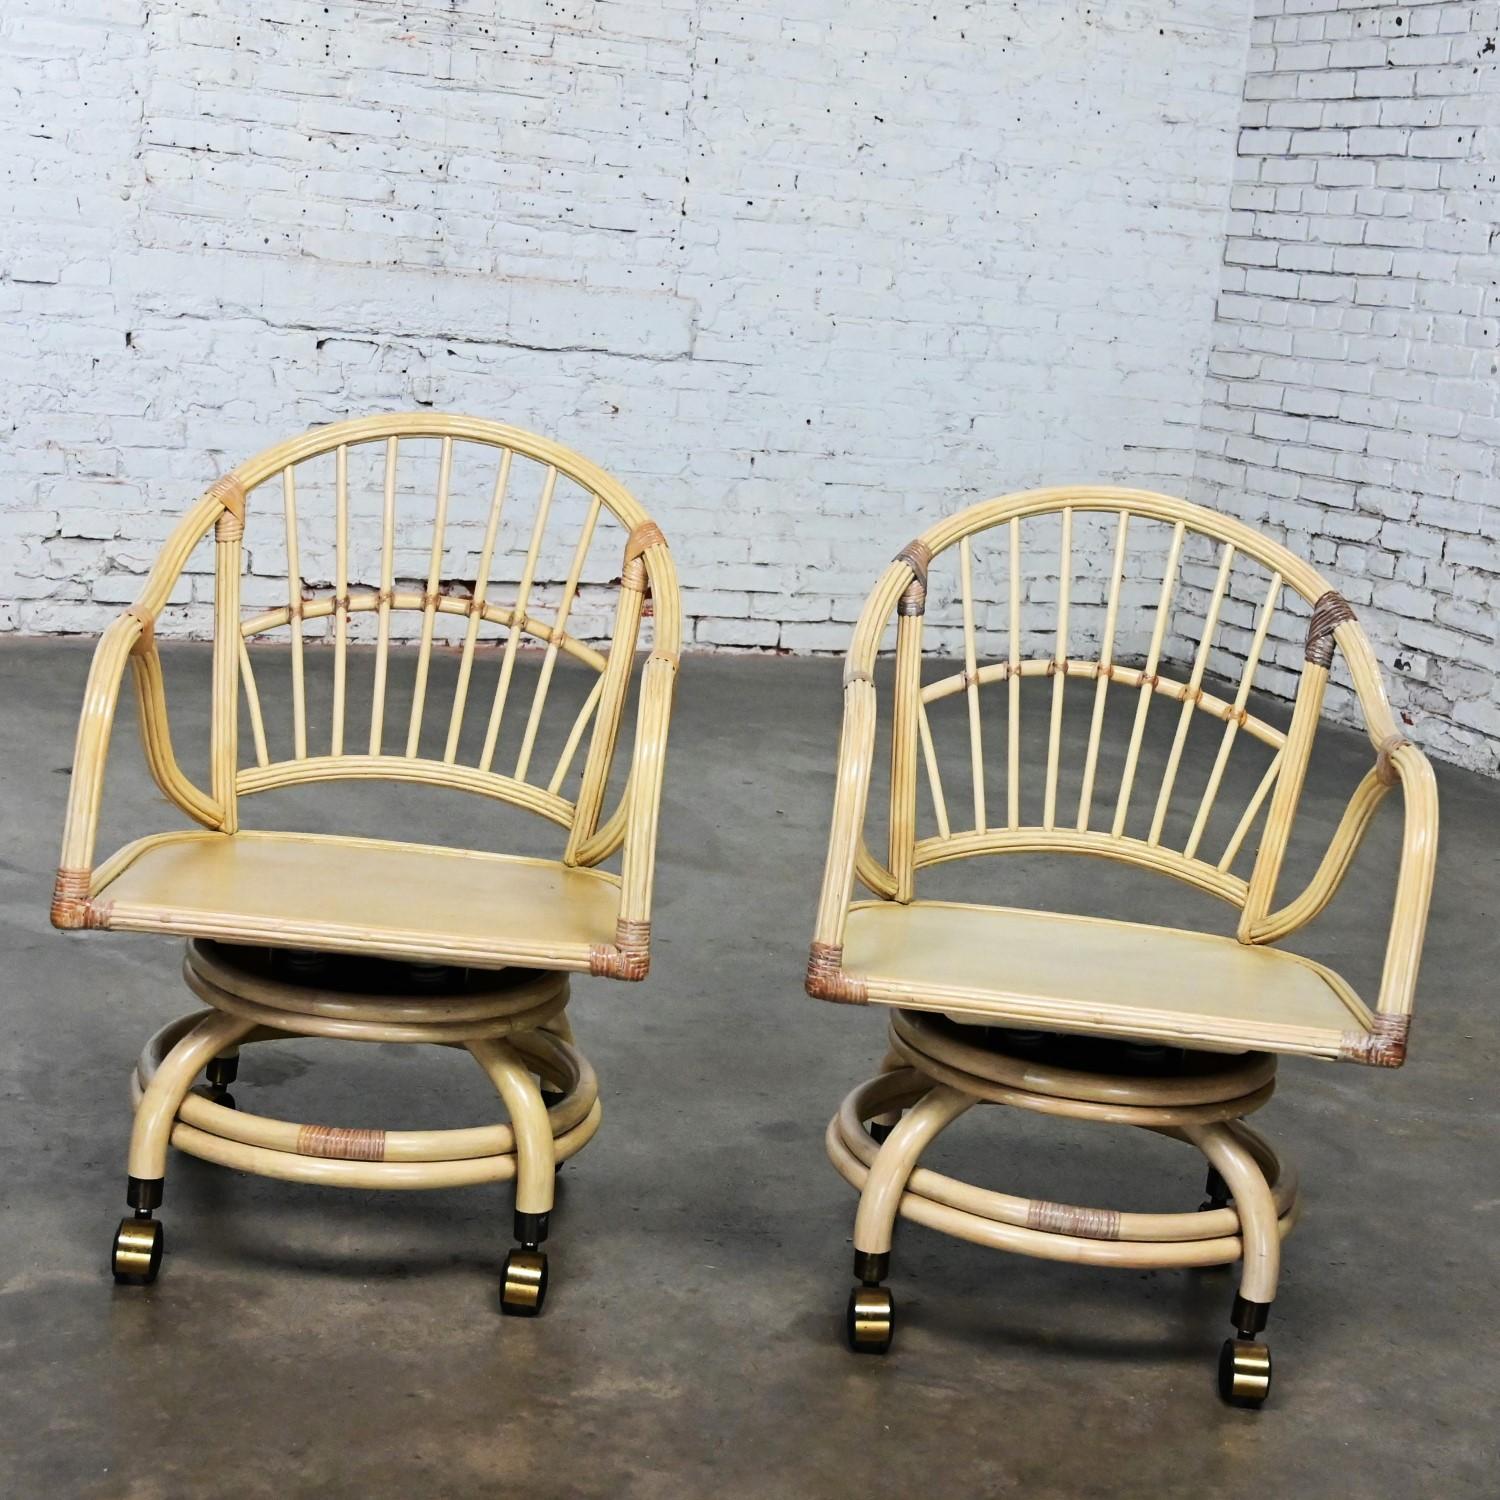 Marvelous vintage Coastal Tropical Island style cerused or whitewashed reeded rattan rolling & swivel chairs, a pair by Classic Rattan. Beautiful condition, keeping in mind that this is vintage and not new so will have signs of use and wear even if